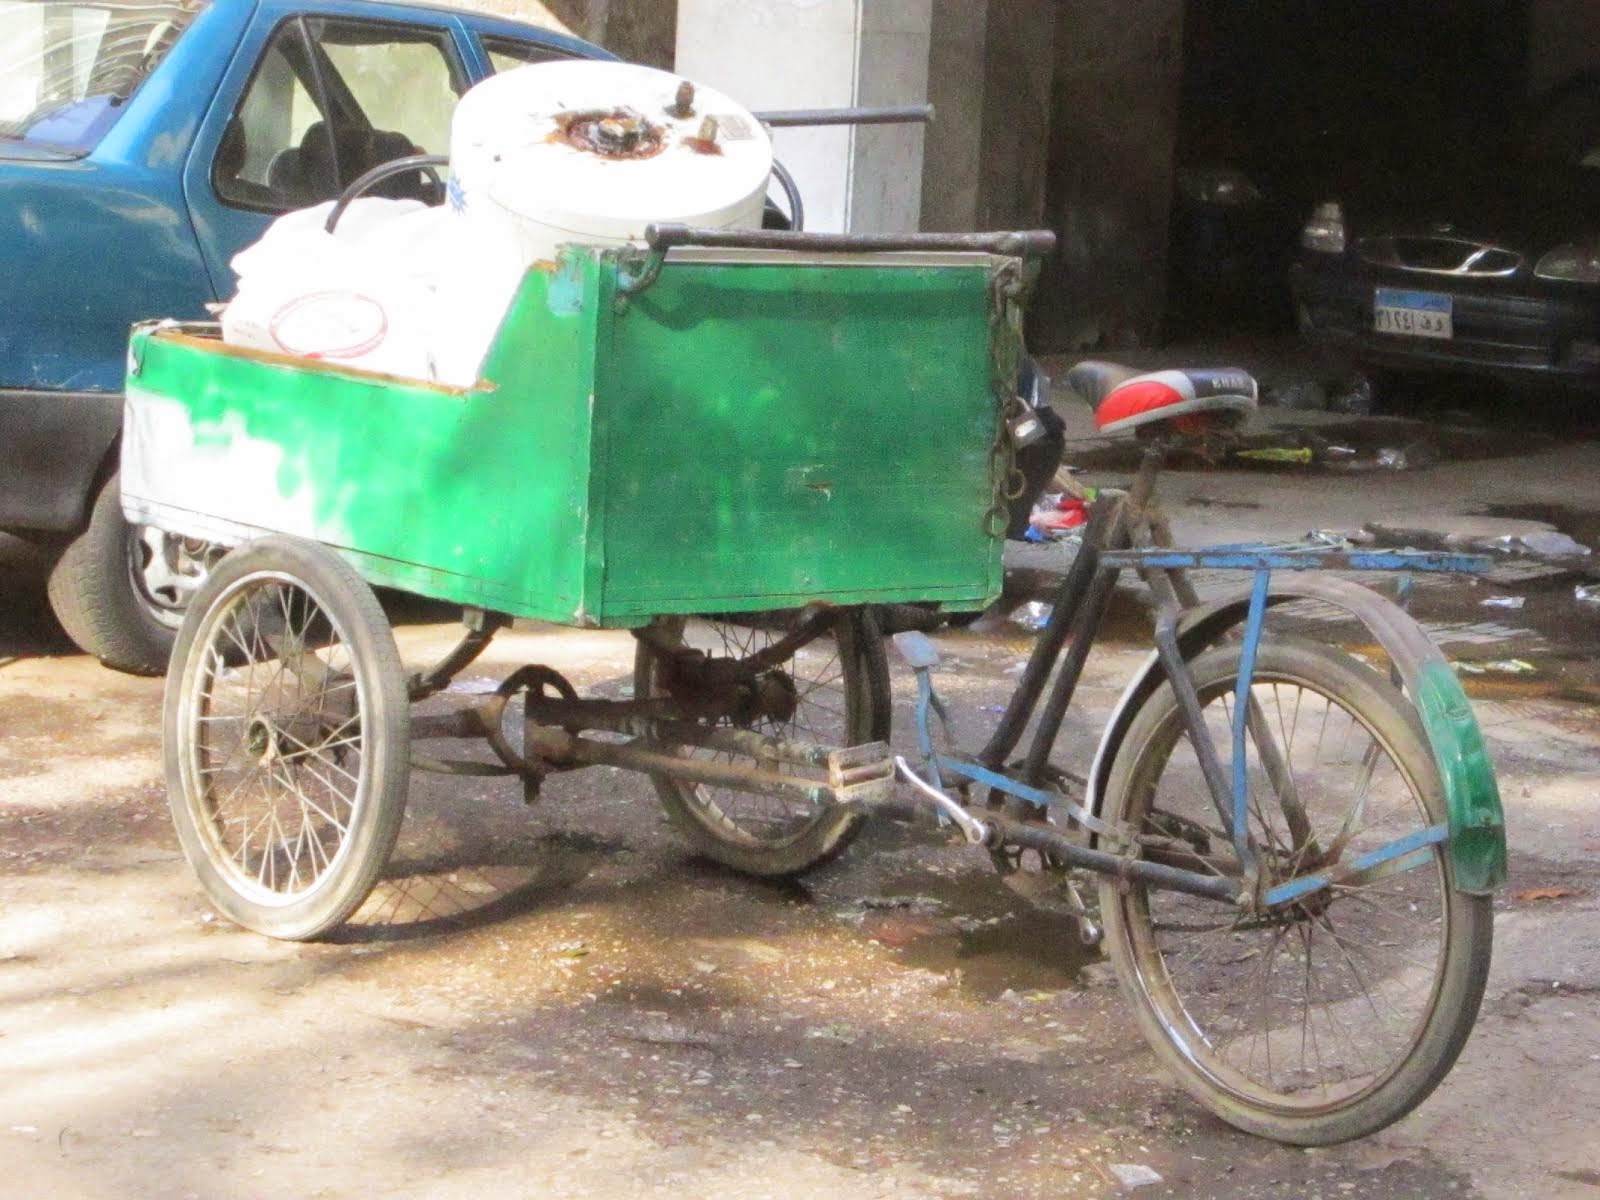 Another Cool Bicycle Used for Sustainable Transport in Cairo